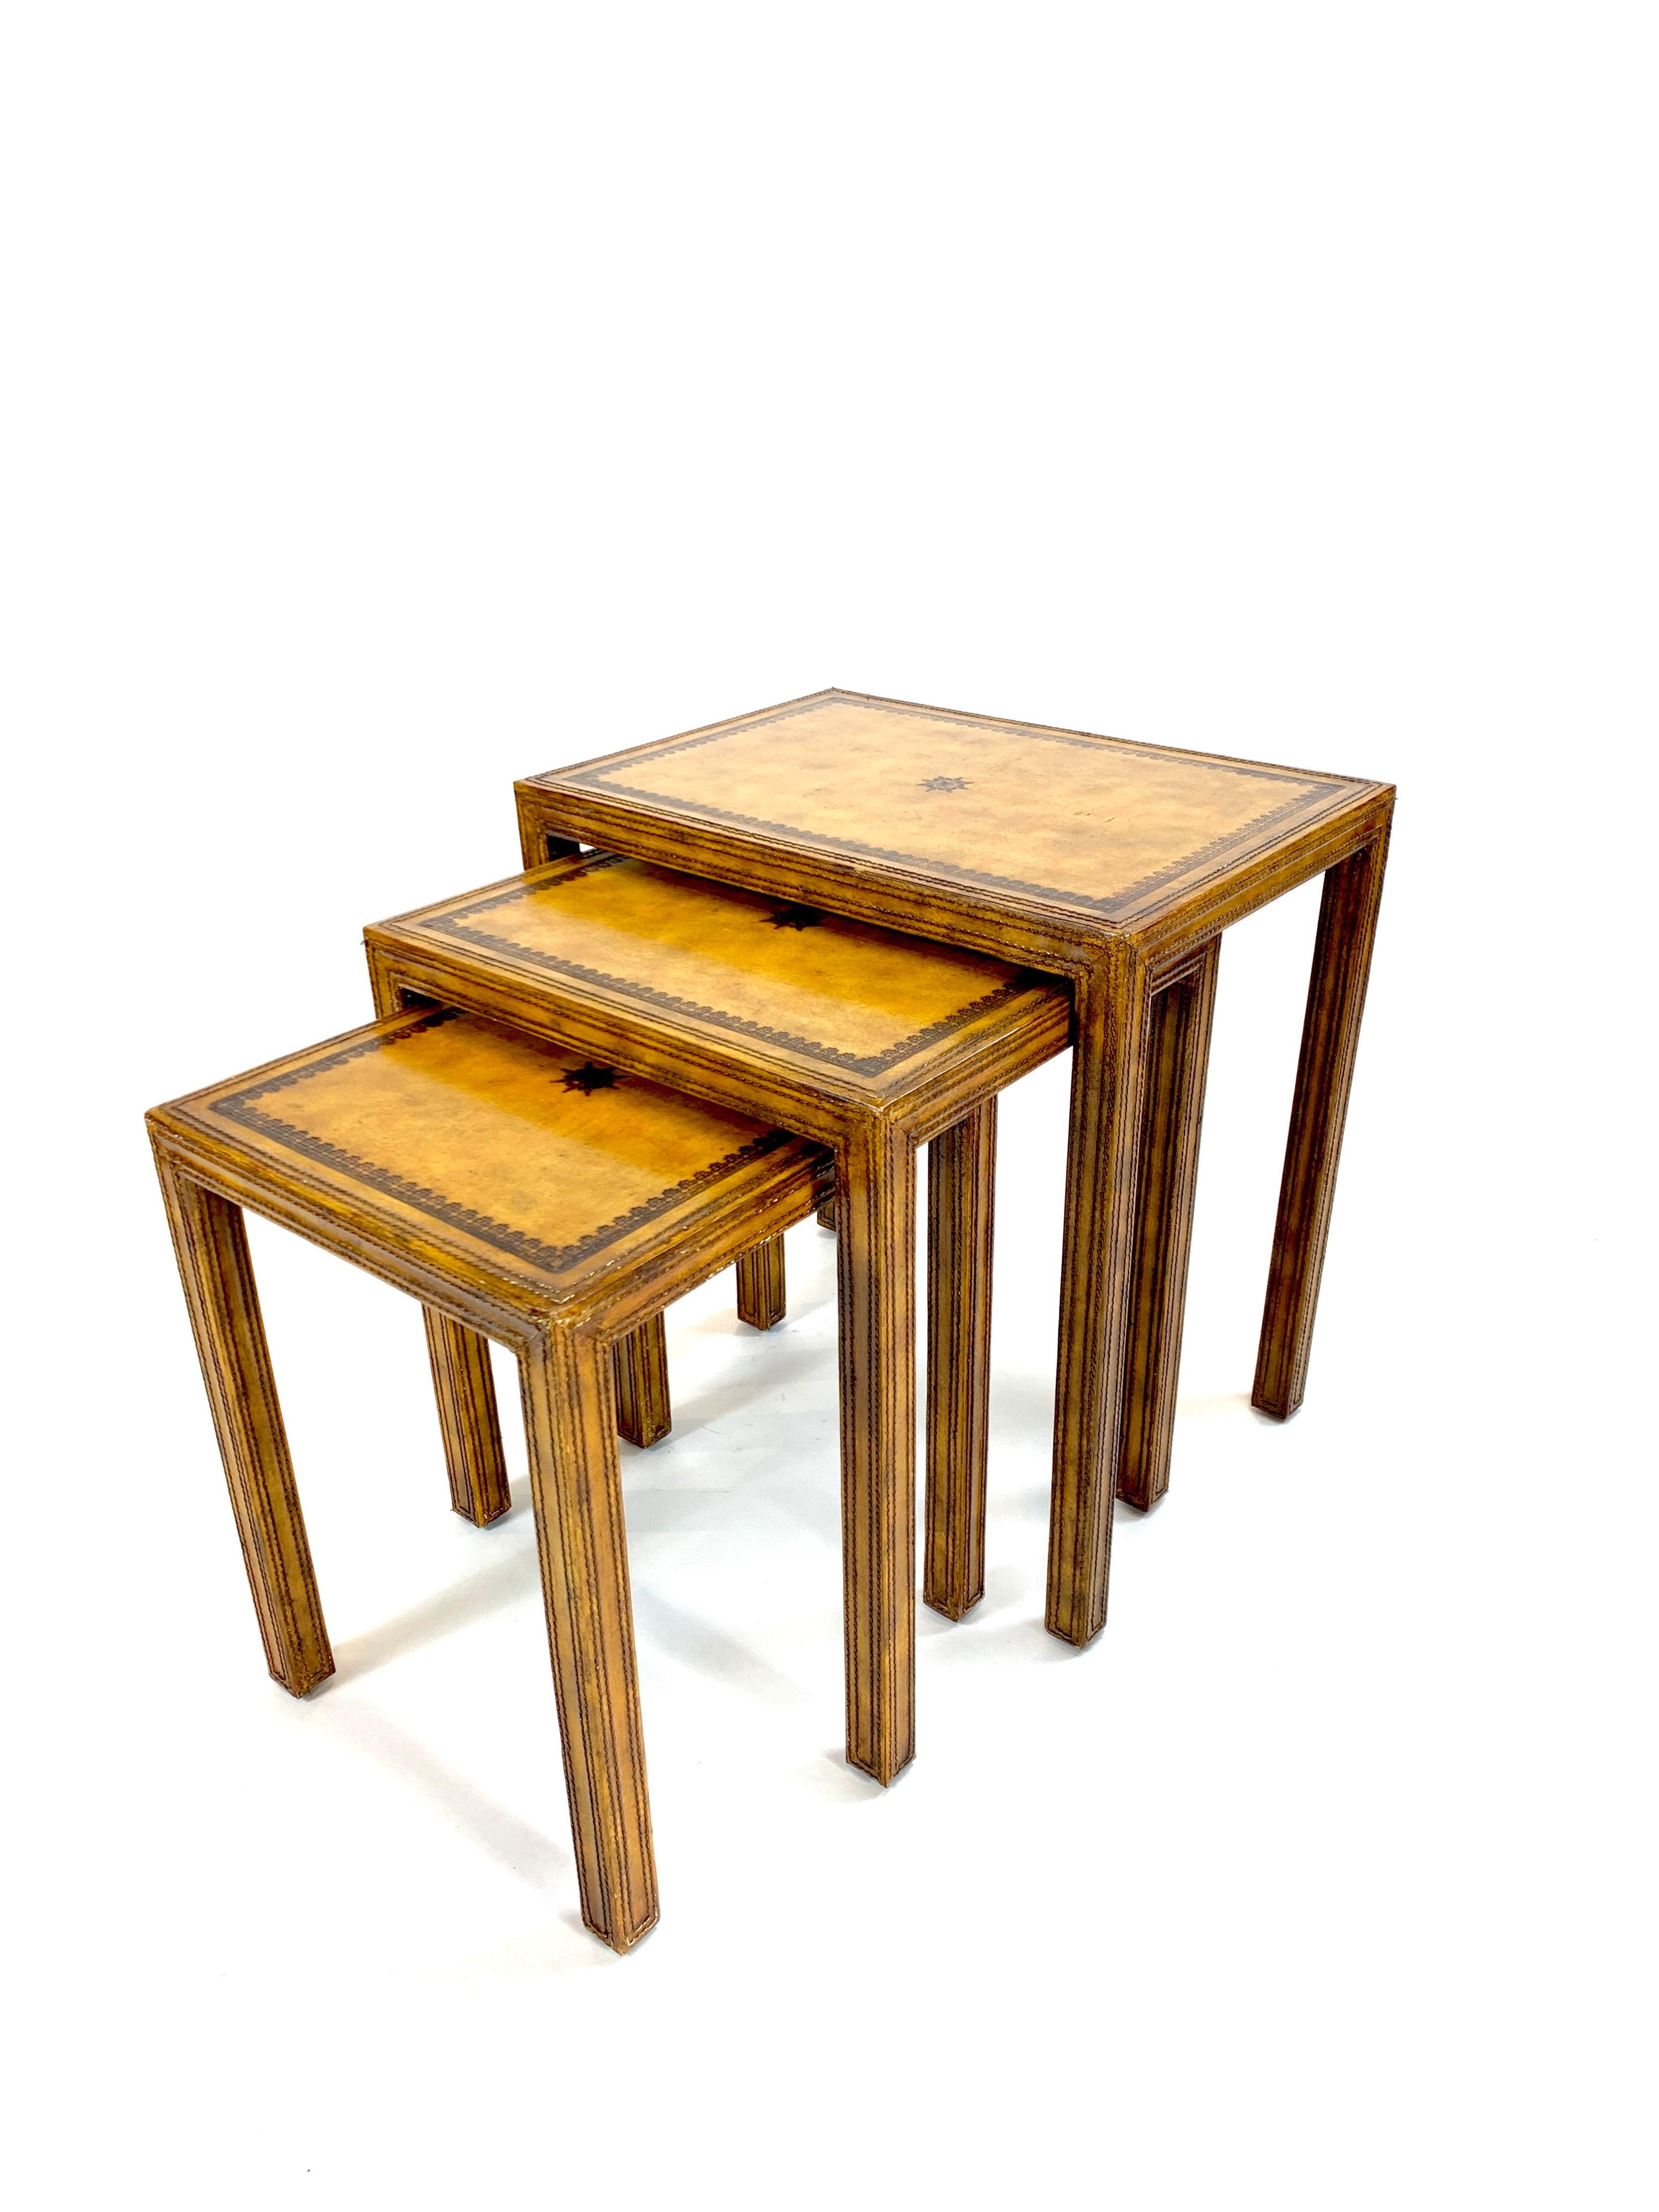 Substantial yet diminutive set of 3 nesting tables by Maitland Smith. Meticulous leatherwork and pyrography evident in these beautiful tables.